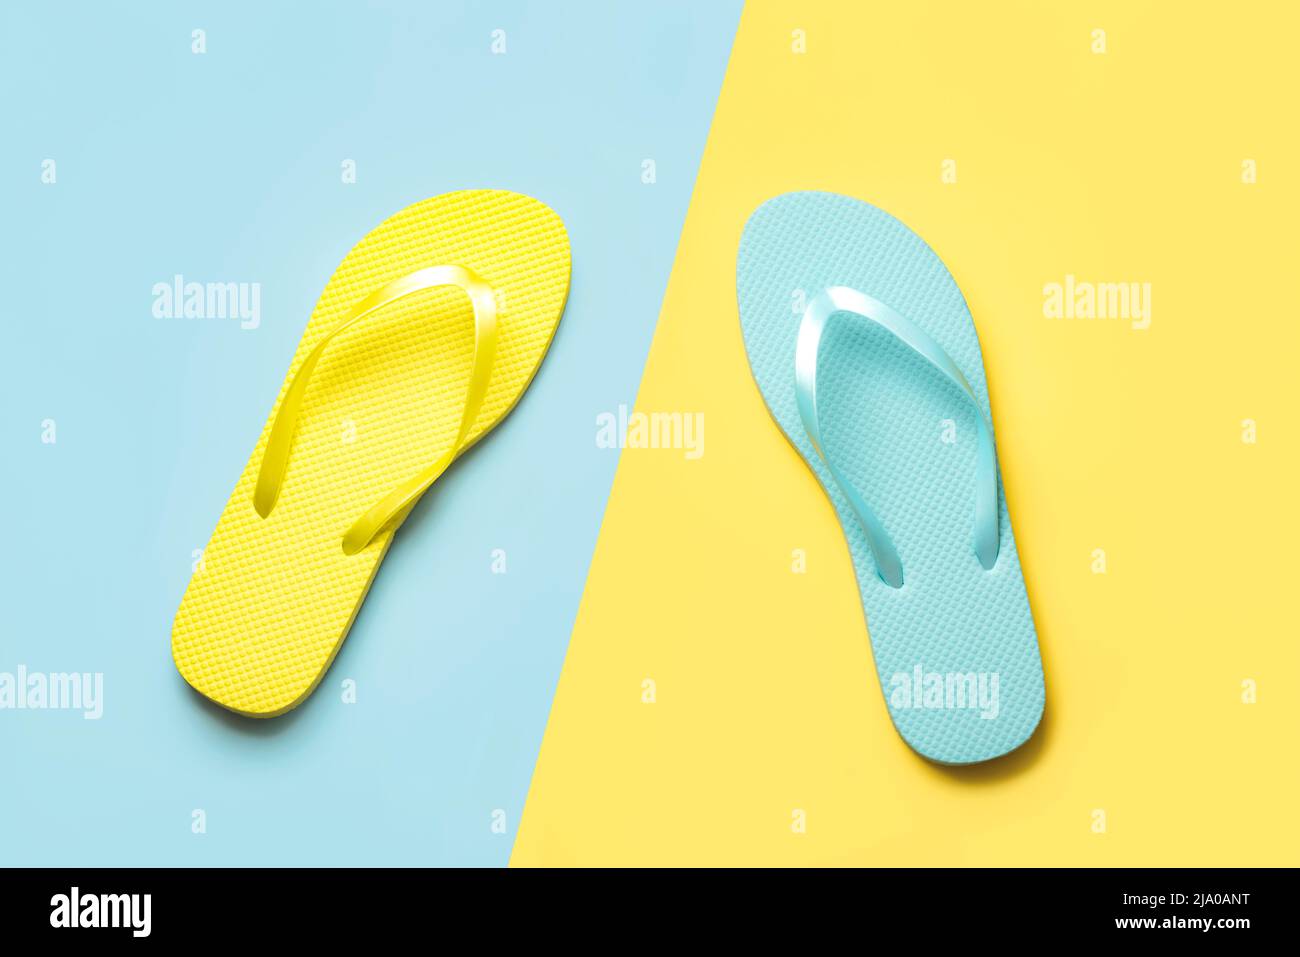 Summer holiday concept.Top view of colored beach flip flops over blue and yellow background Stock Photo